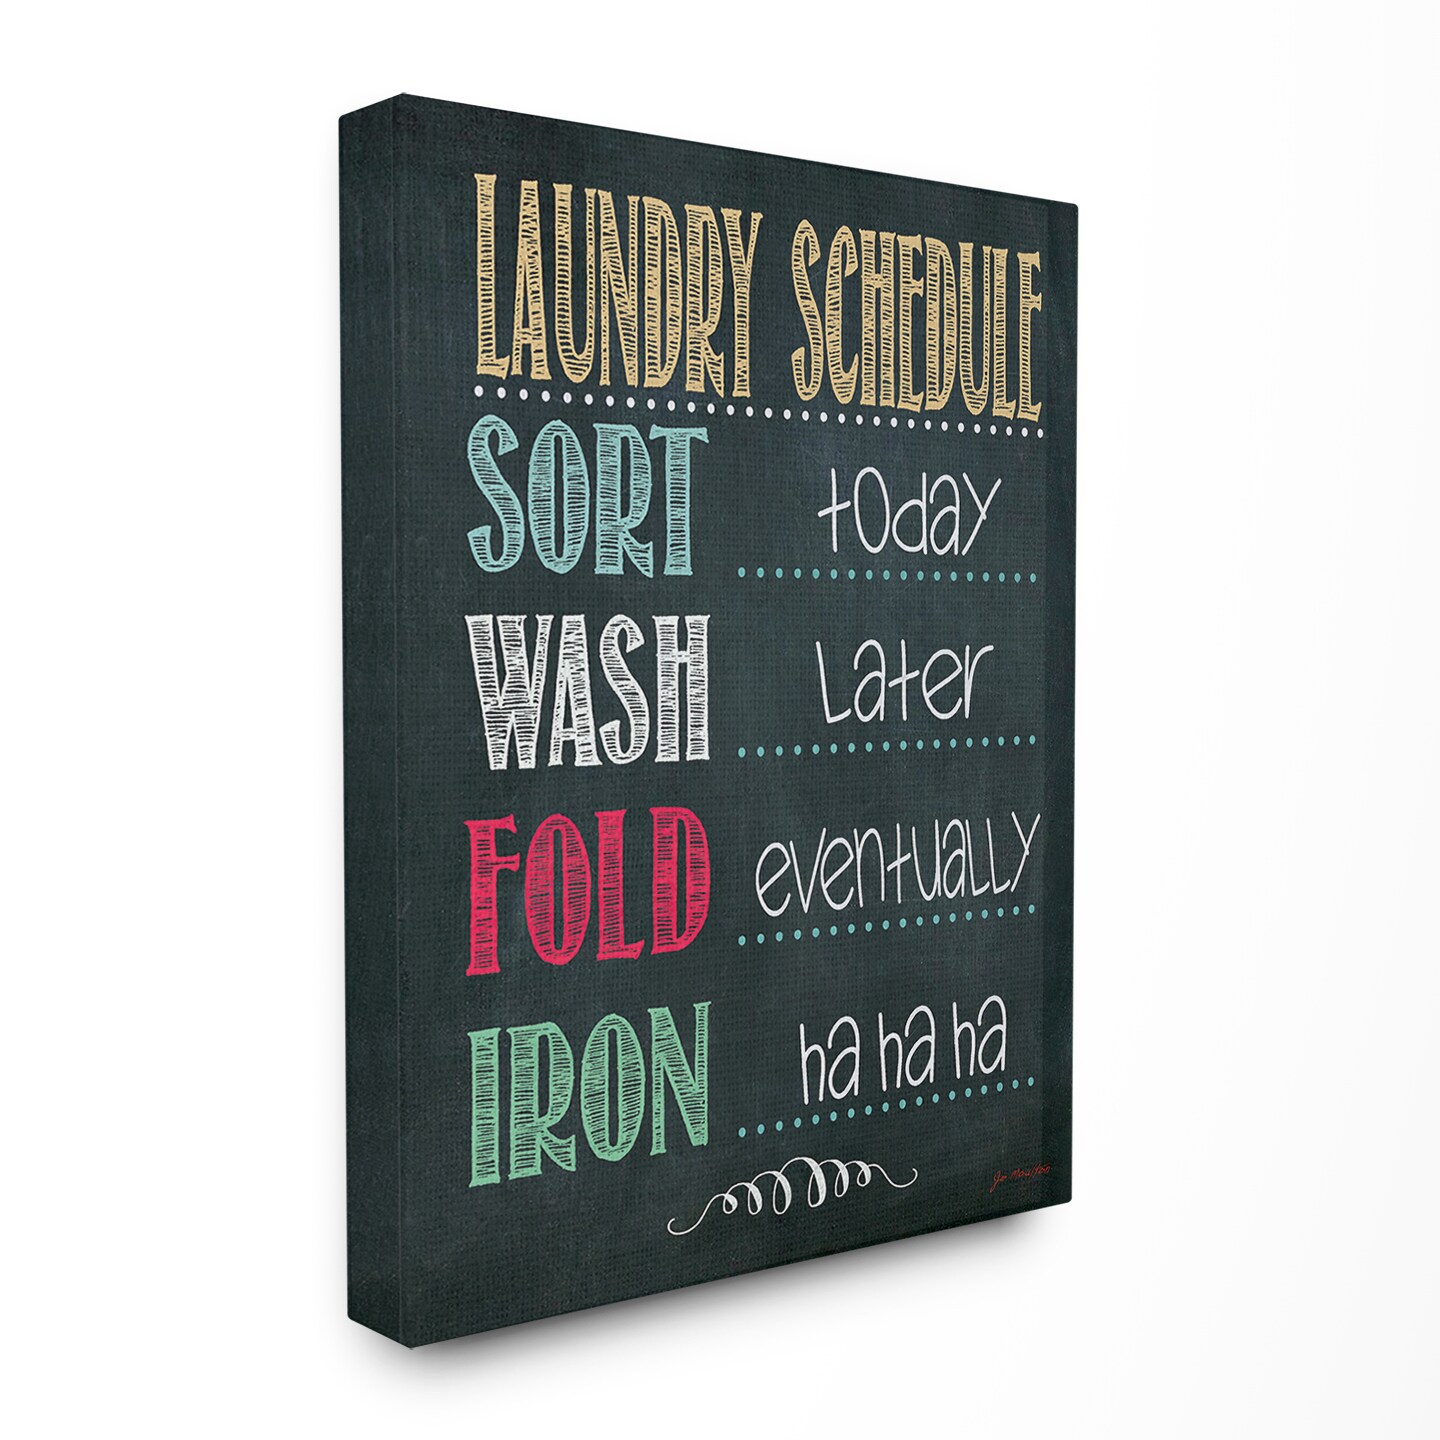 16" x 32" Canvas Wall Scroll Art Poster Laundry Schedule Scroll 